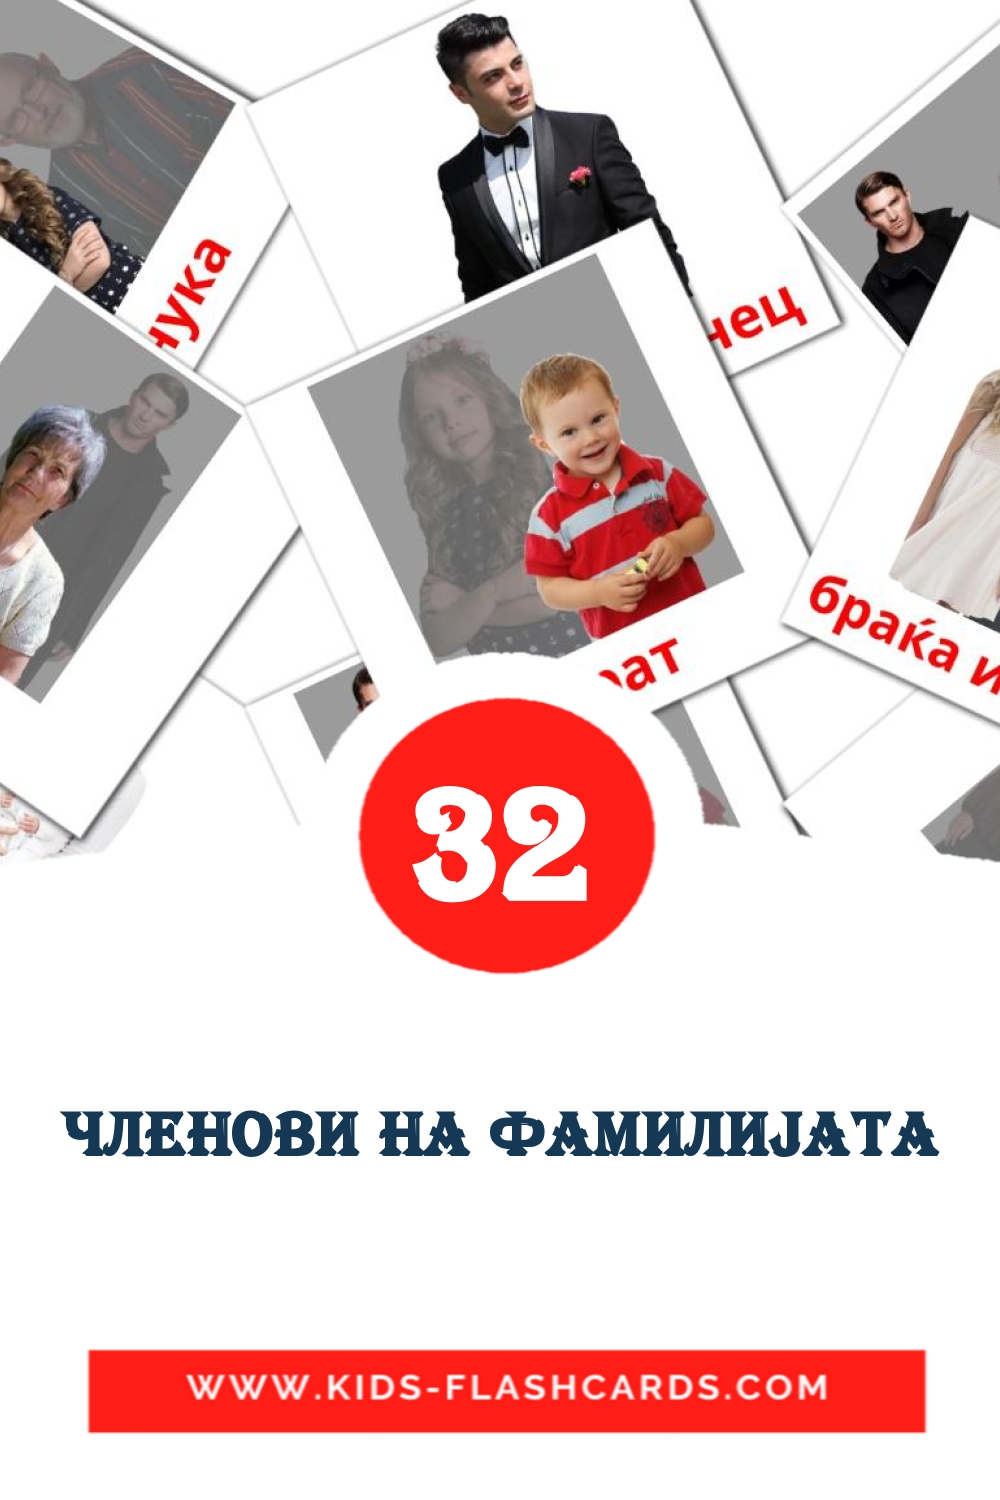 32 Членови на фамилиjата Picture Cards for Kindergarden in macedonian